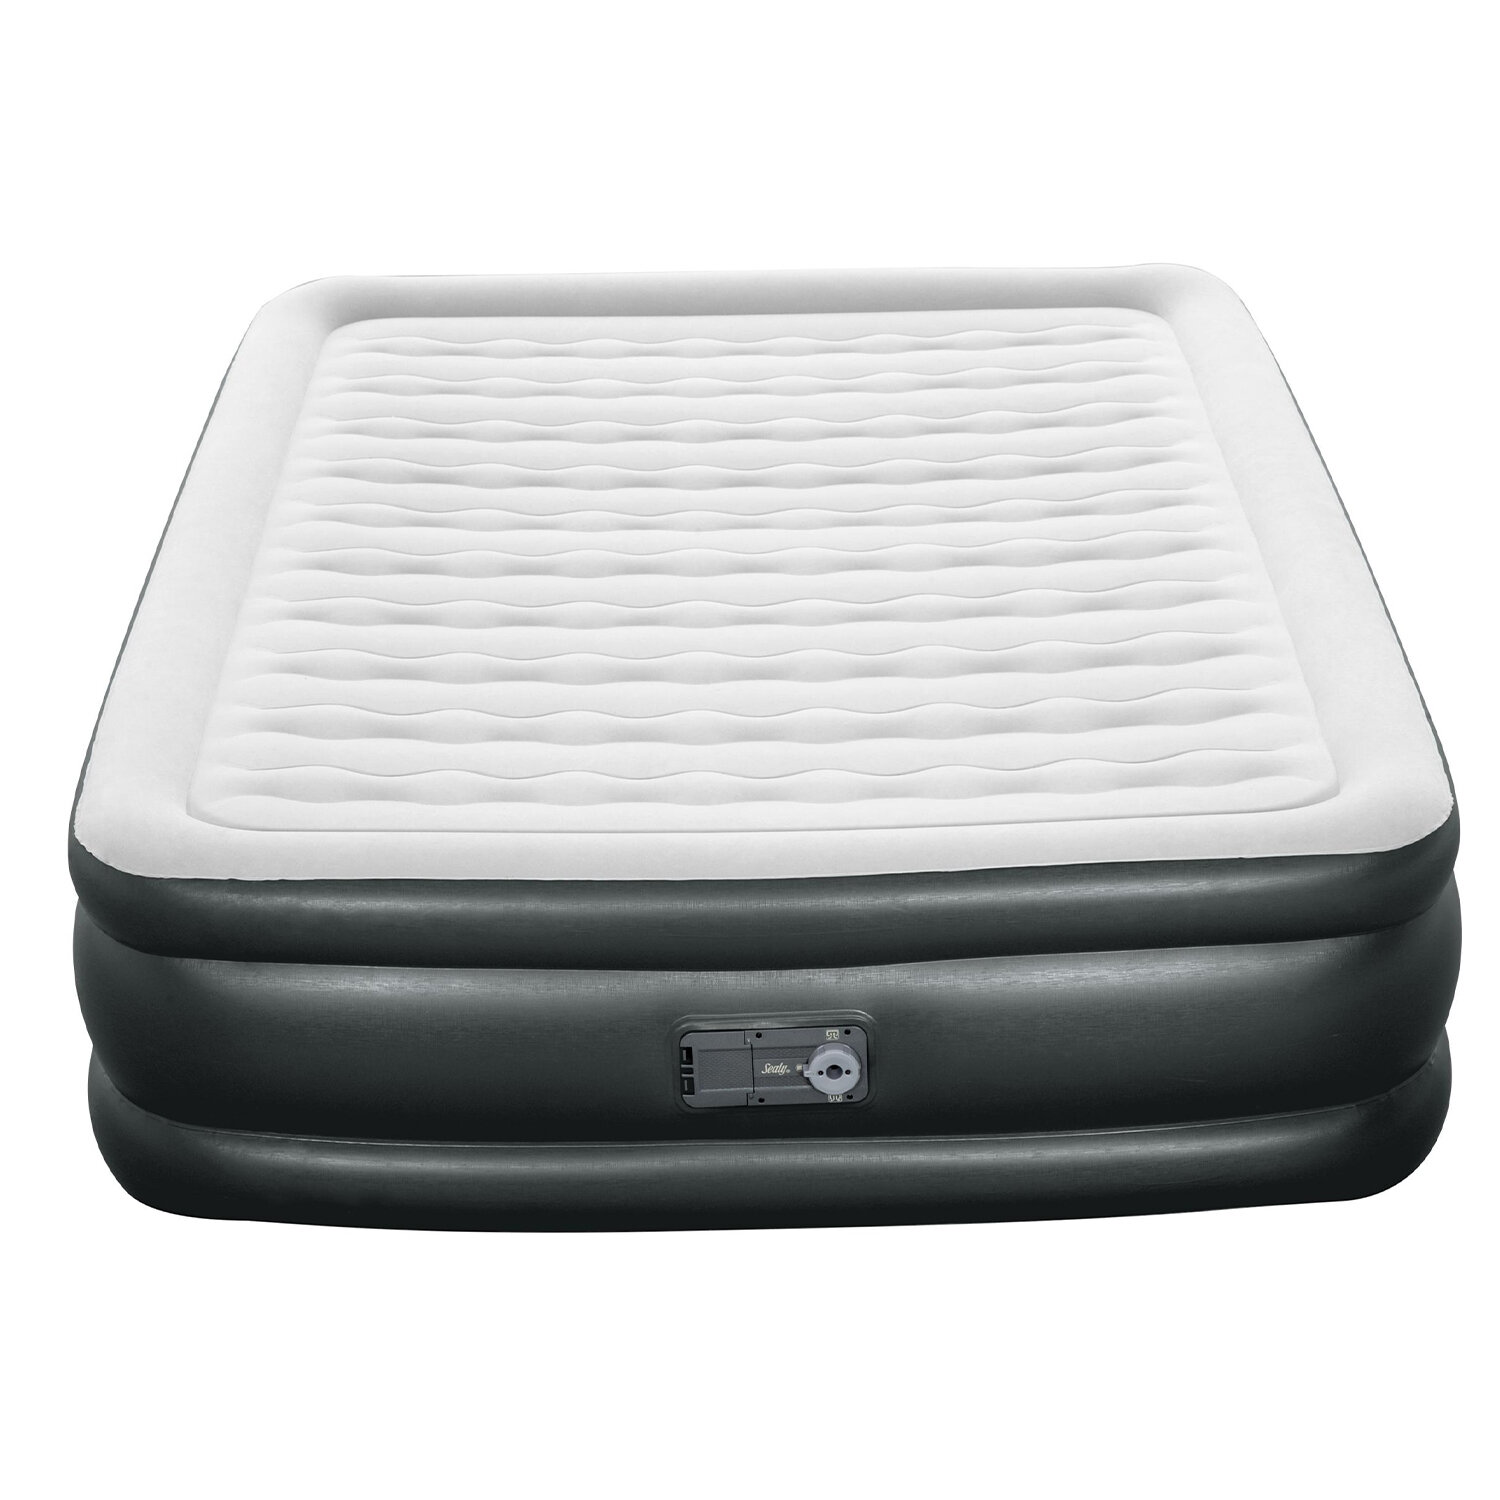 203 x 152 x 48 cm Sable Inflatable Air Bed Double Size Air Mattress with Built-in Electric Pump and Repair Kits